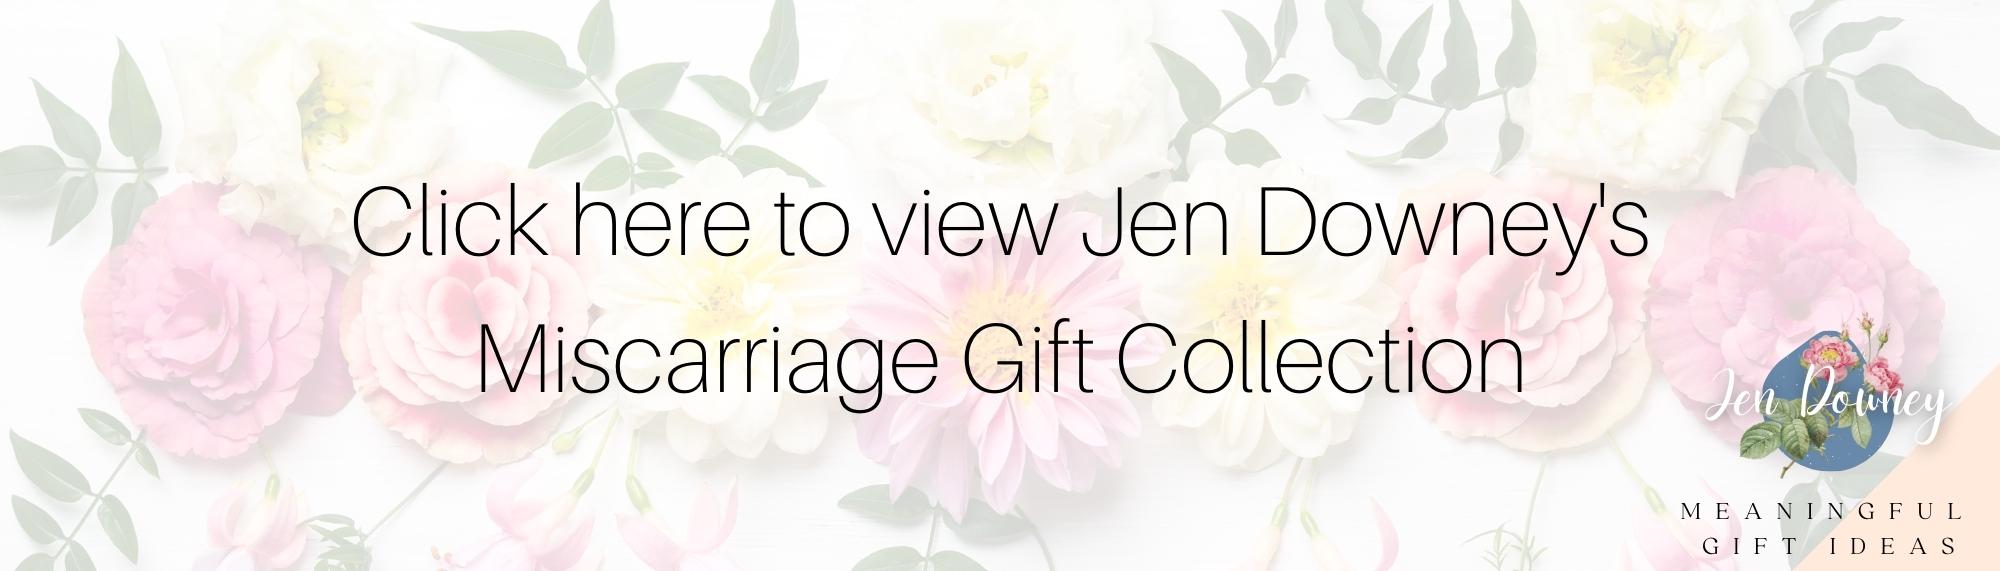 Miscarriage Gift Collection by Jen Downey